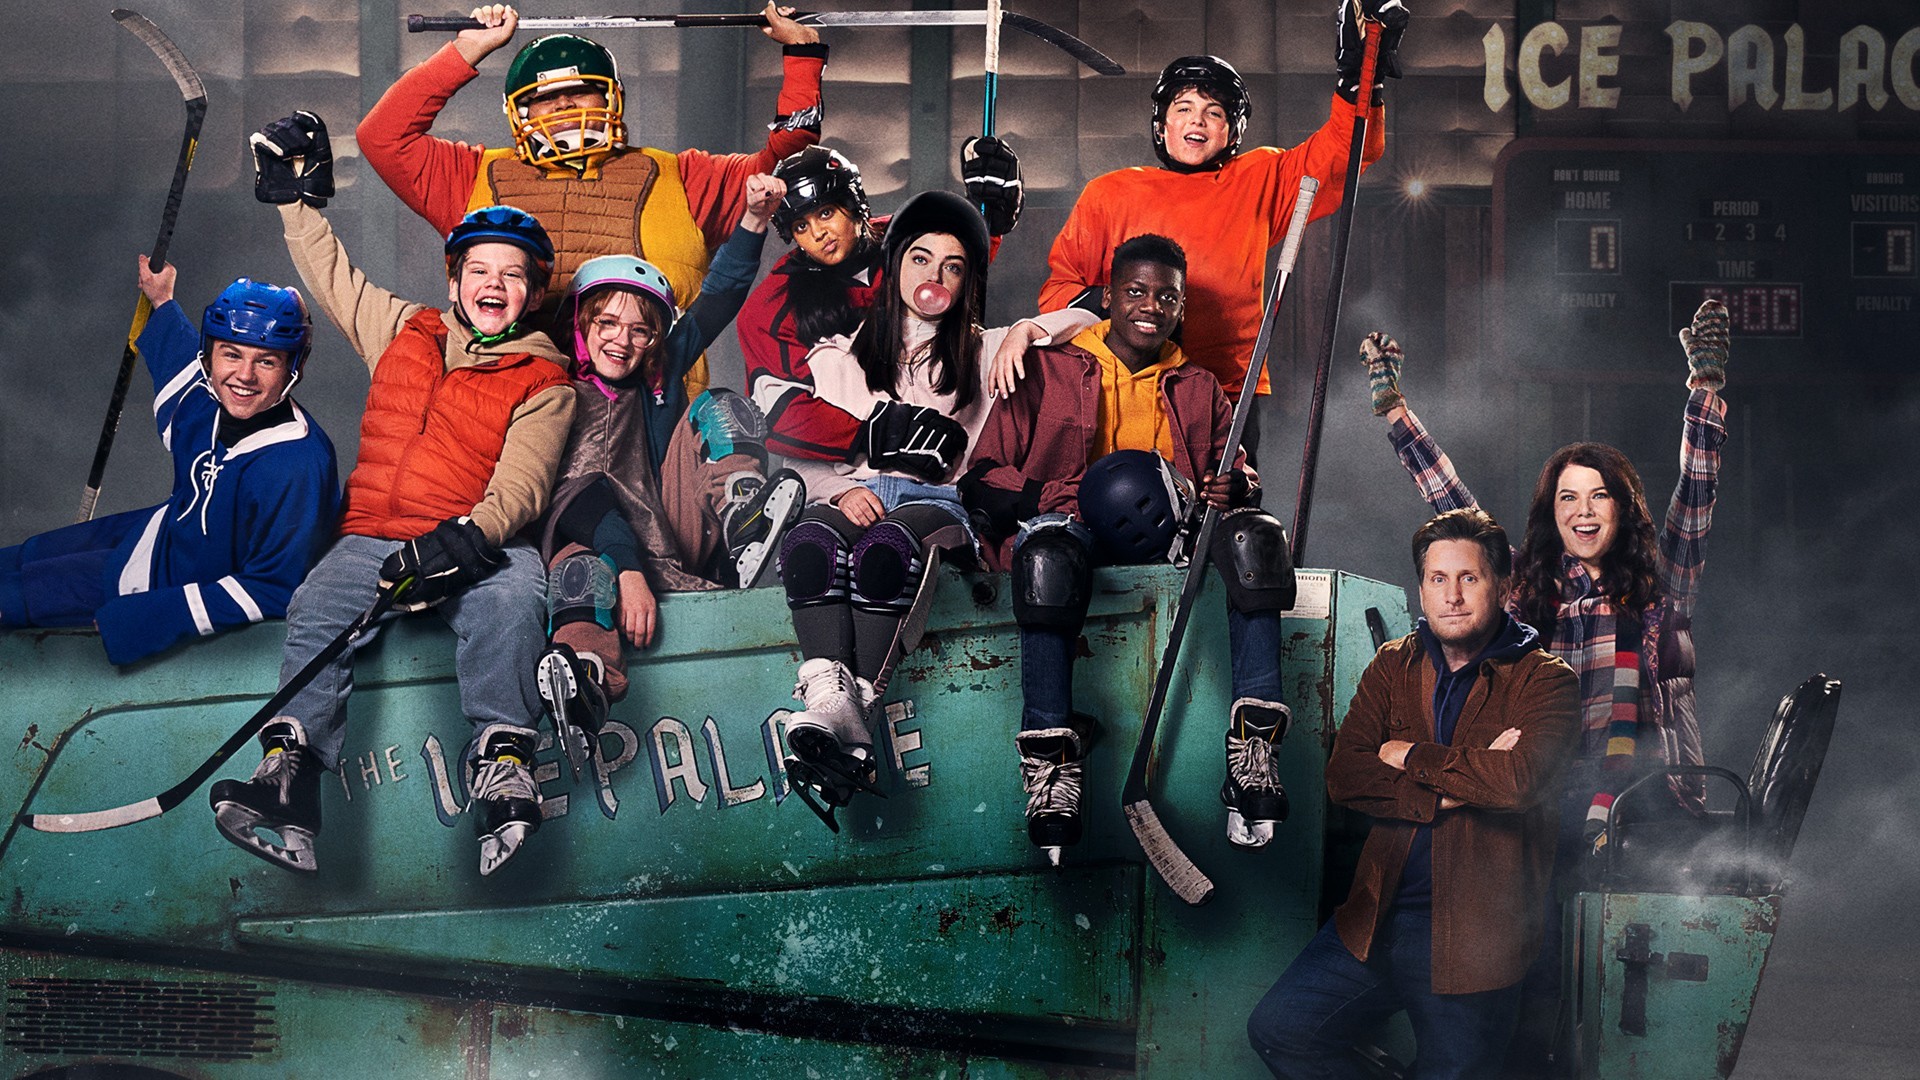 TV Recap: “The Mighty Ducks: Game Changers” Season 2, Episode 3 “Out of  Bounds” 